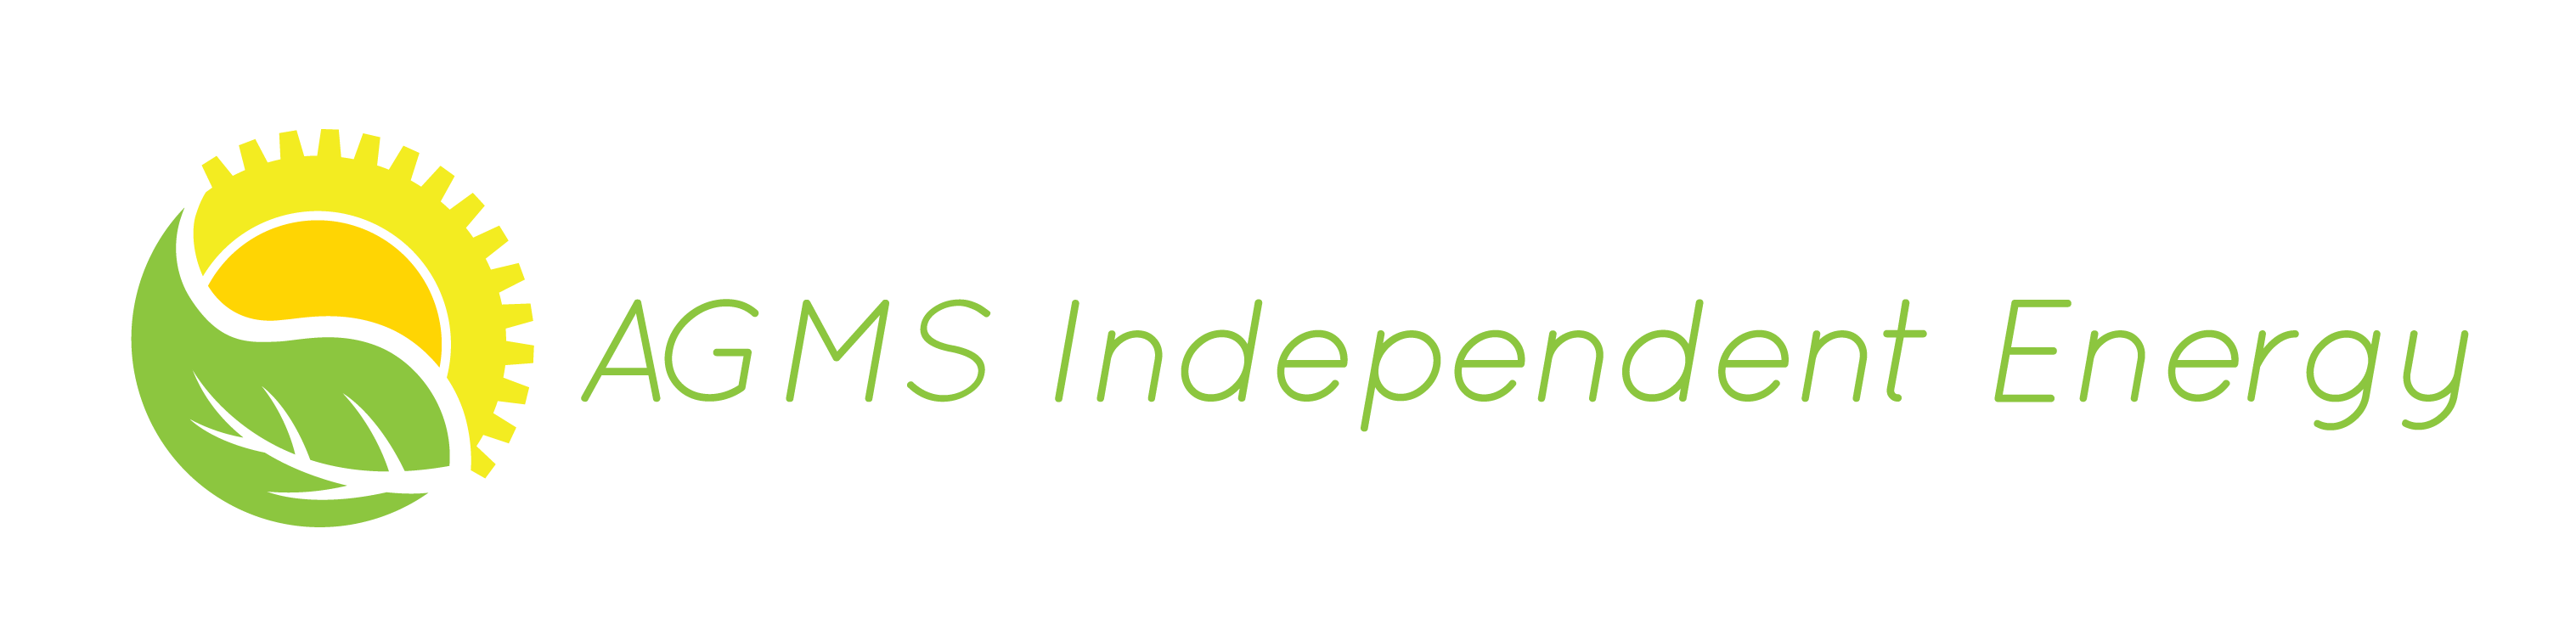 AGMS Independent Energy Logo